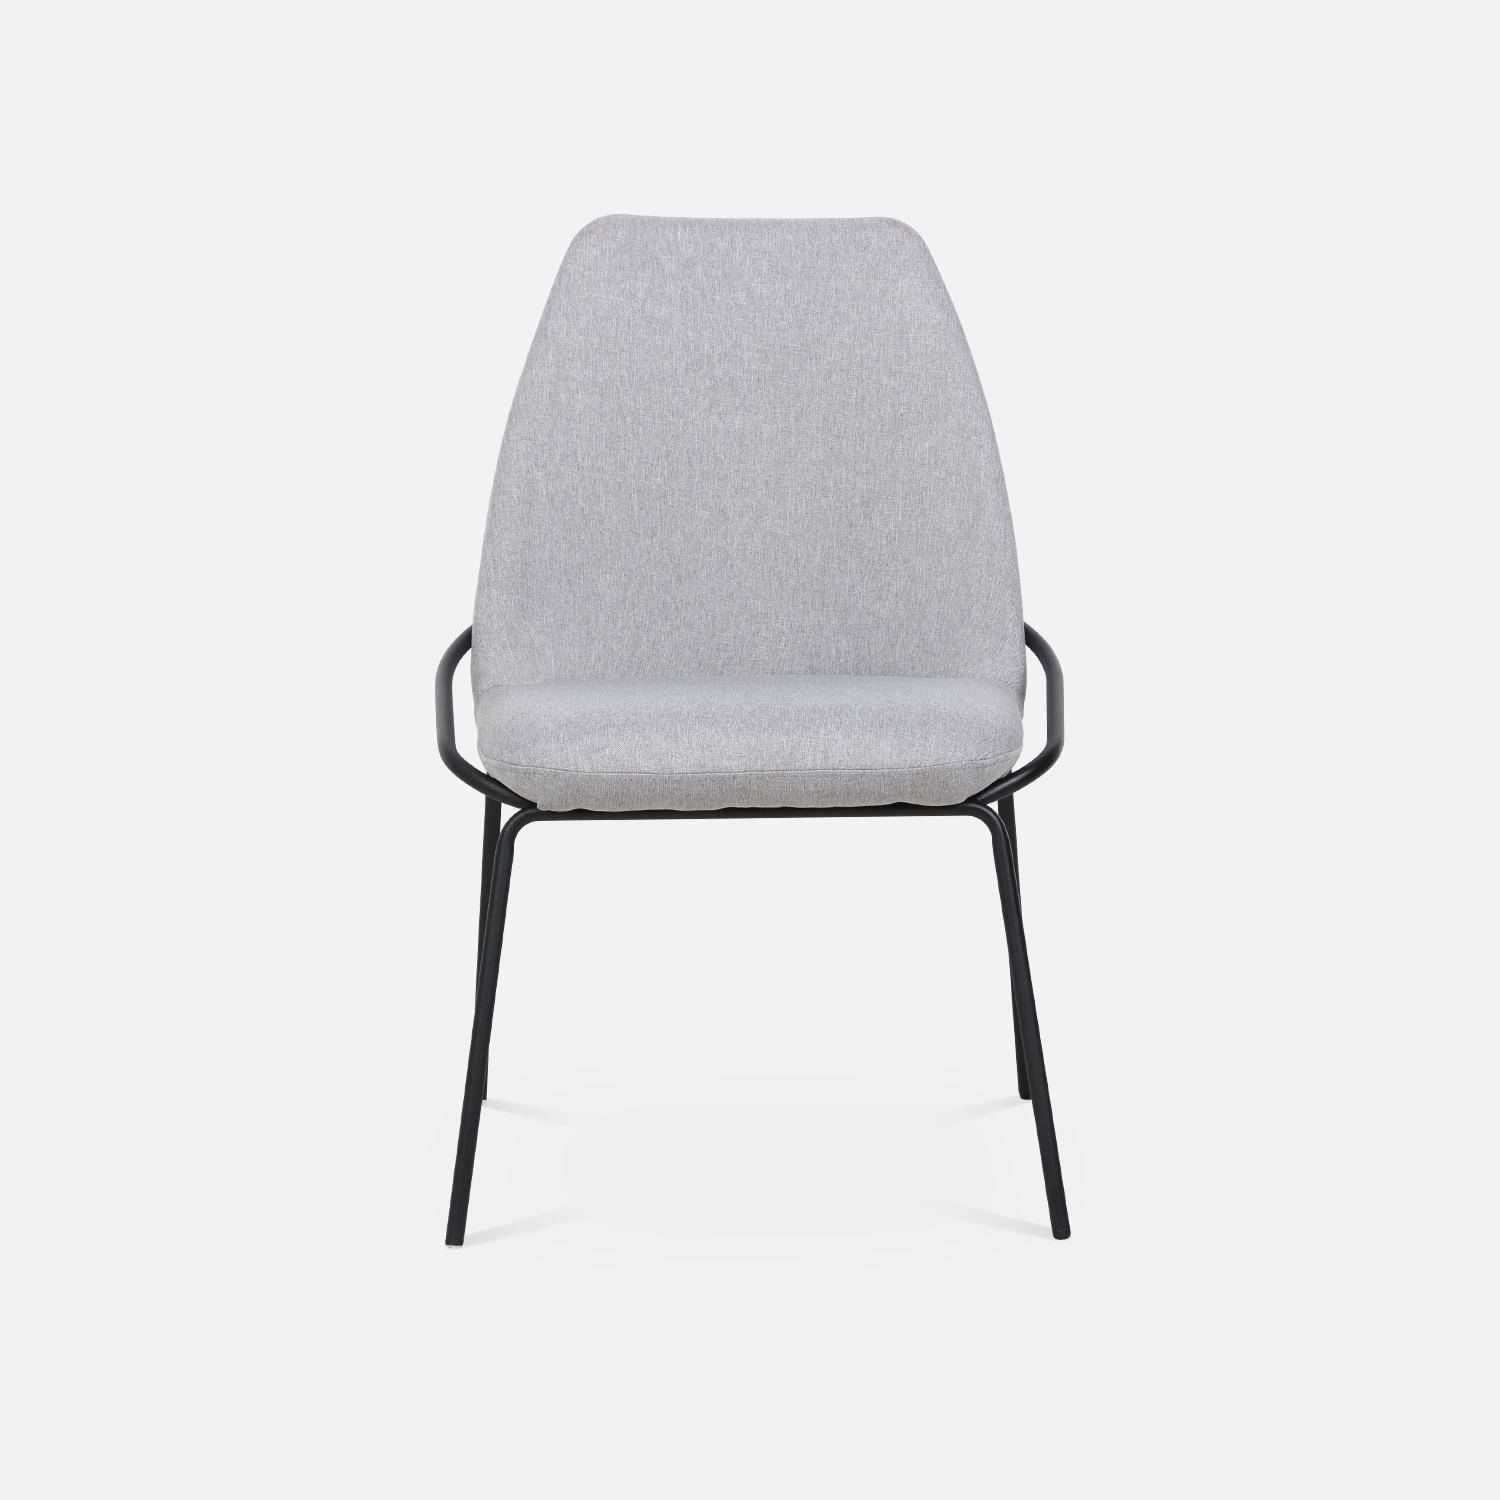 Retro-style metal and upholstered chair, 56.5x63x82.5cm, Lisbet, Light Grey Photo4